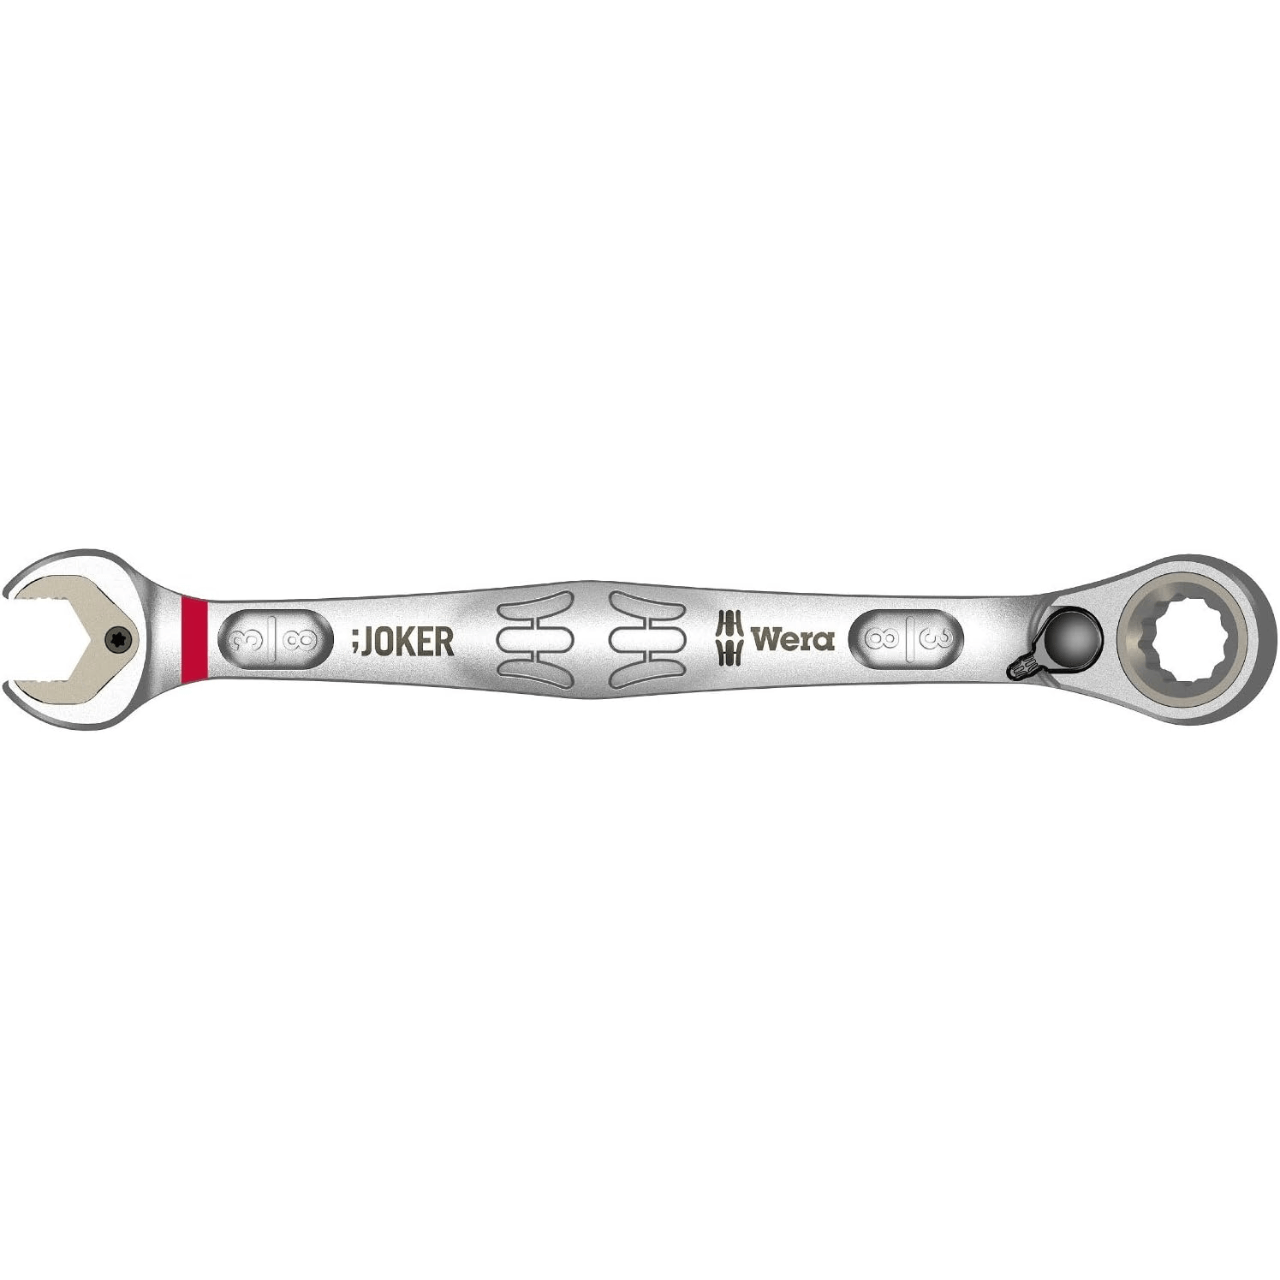 WERA 6001 Joker Switch Ratcheting combination wrench, with switch lever, imperial 3/8x159mm